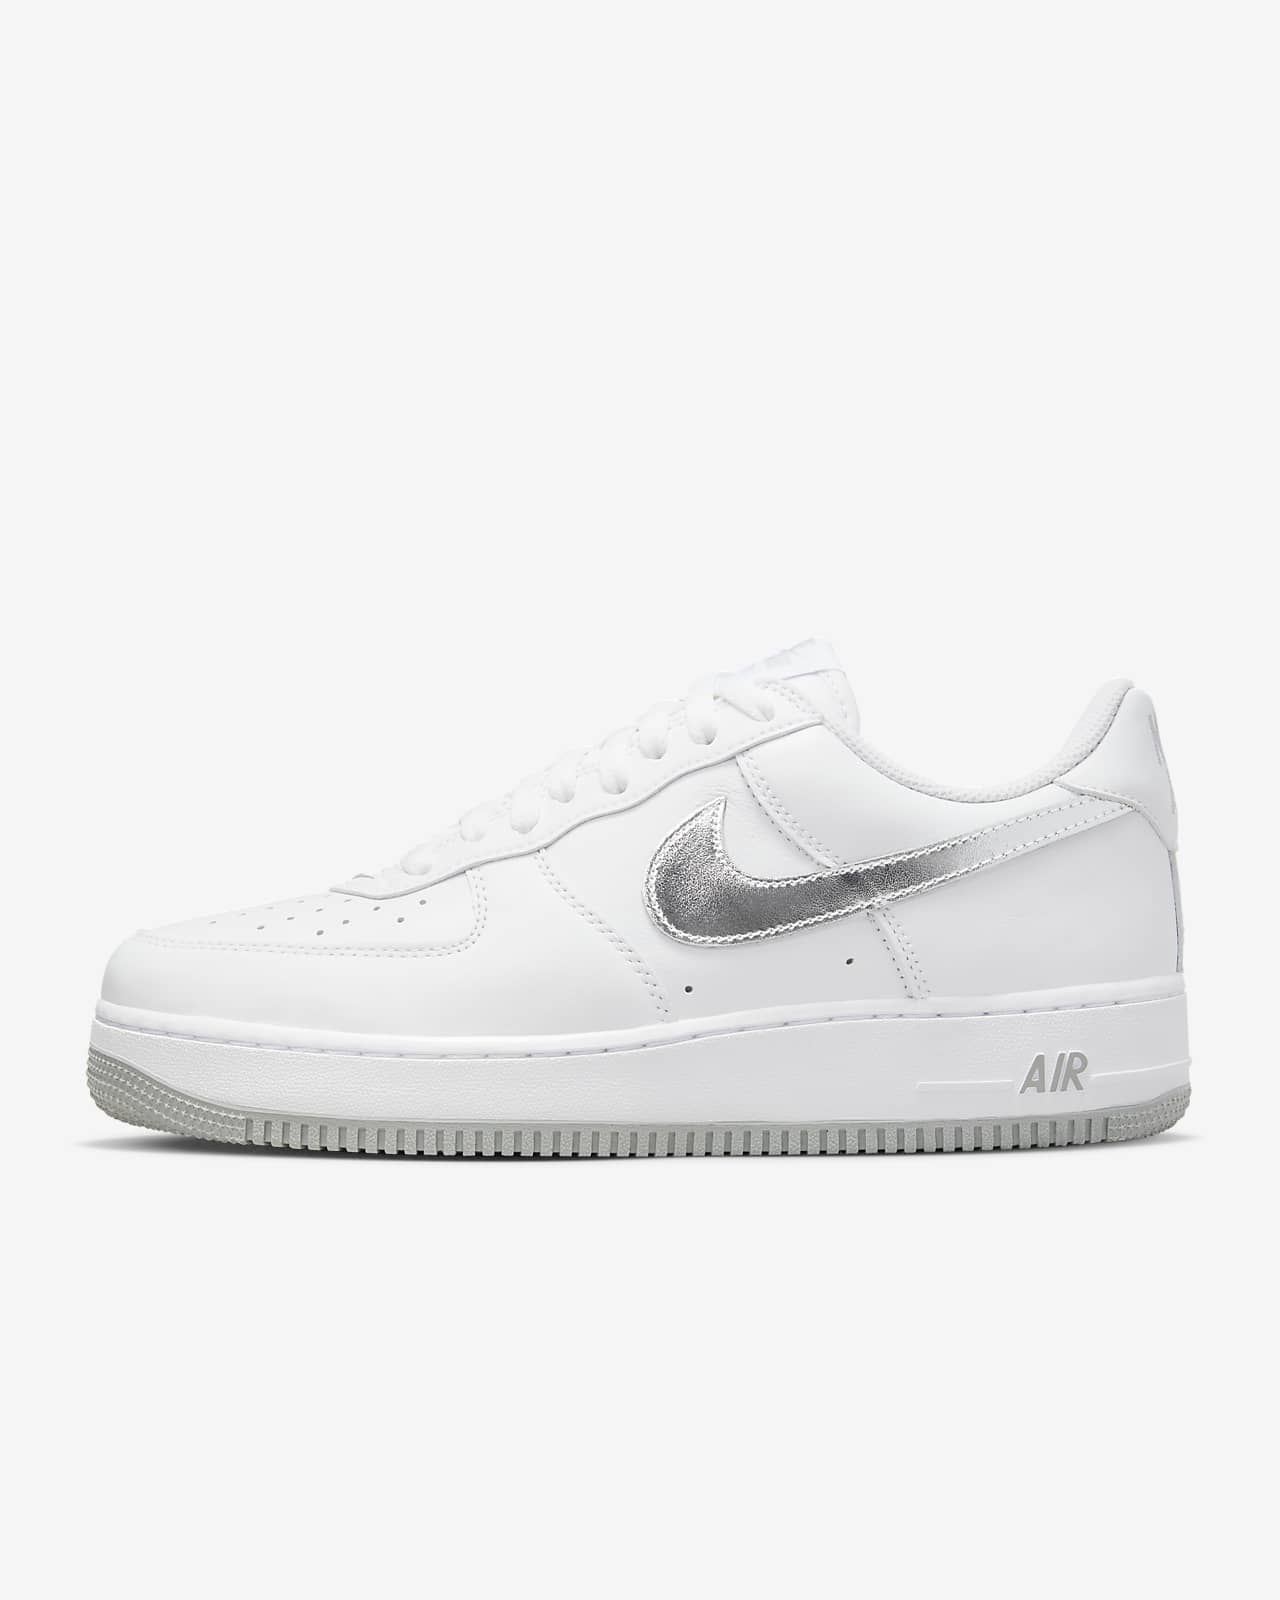 student discount nike air force 1